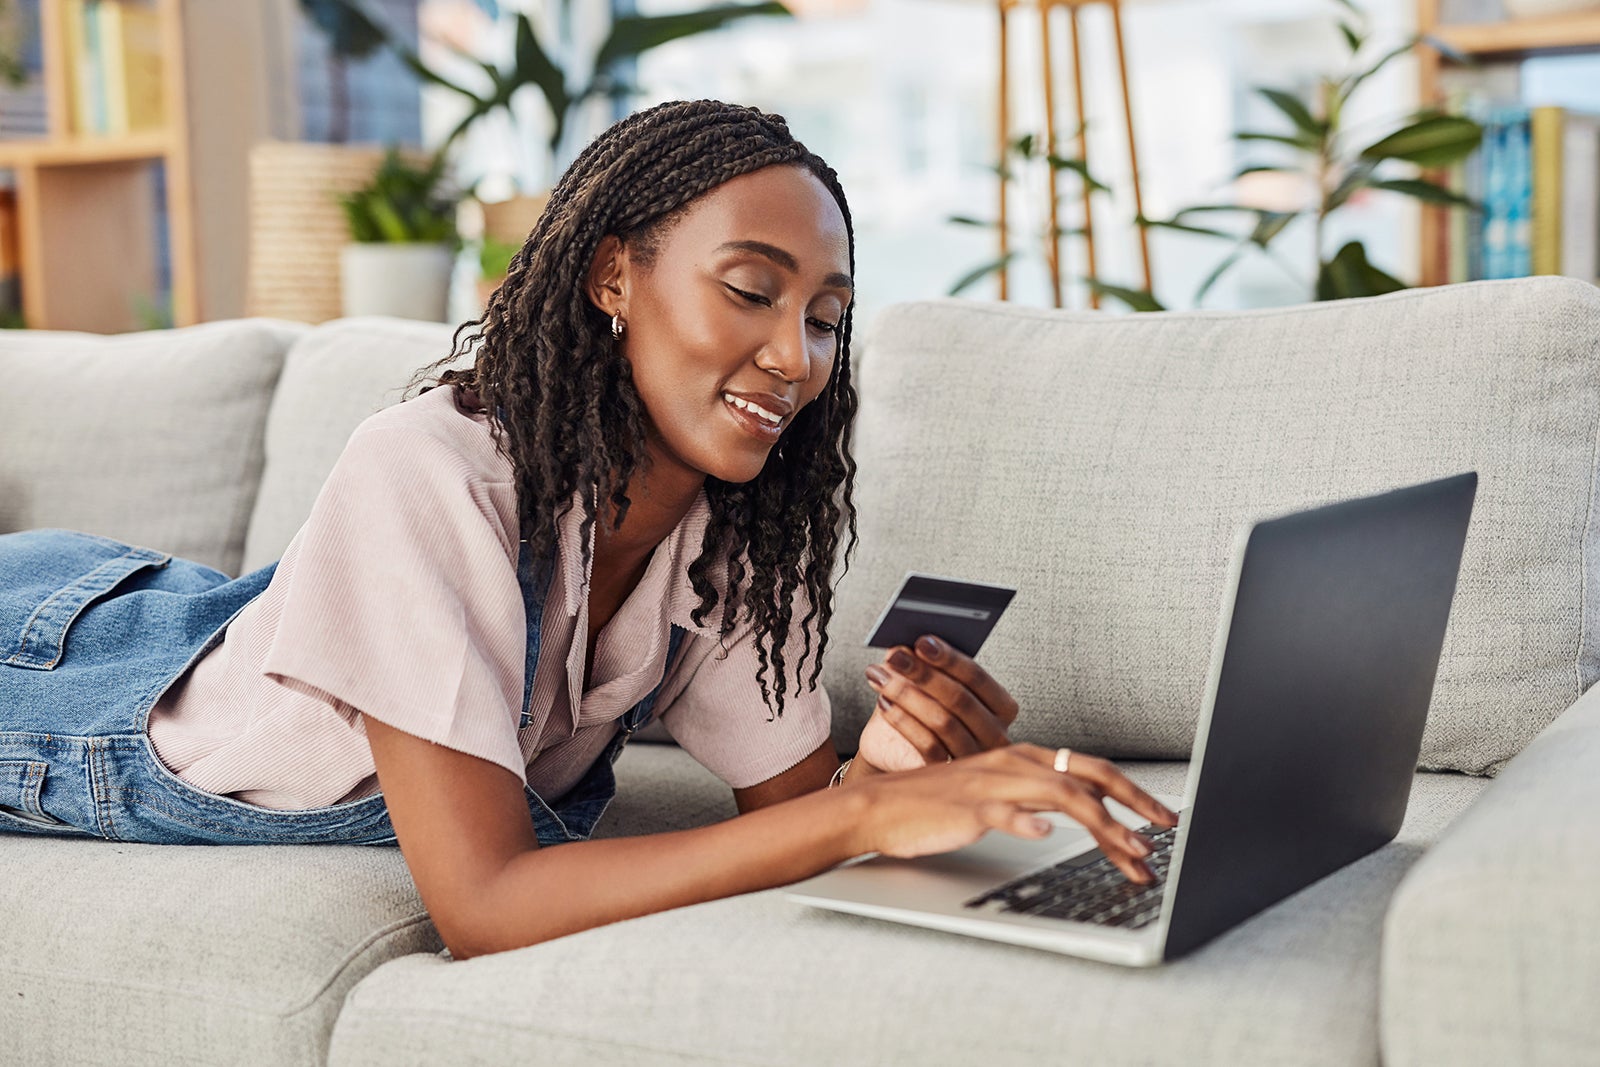 Online shopping, woman with laptop and credit card for payment on a sofa in living room of her home. Ecommerce, investment or pay bills and African female person with bank information for internet